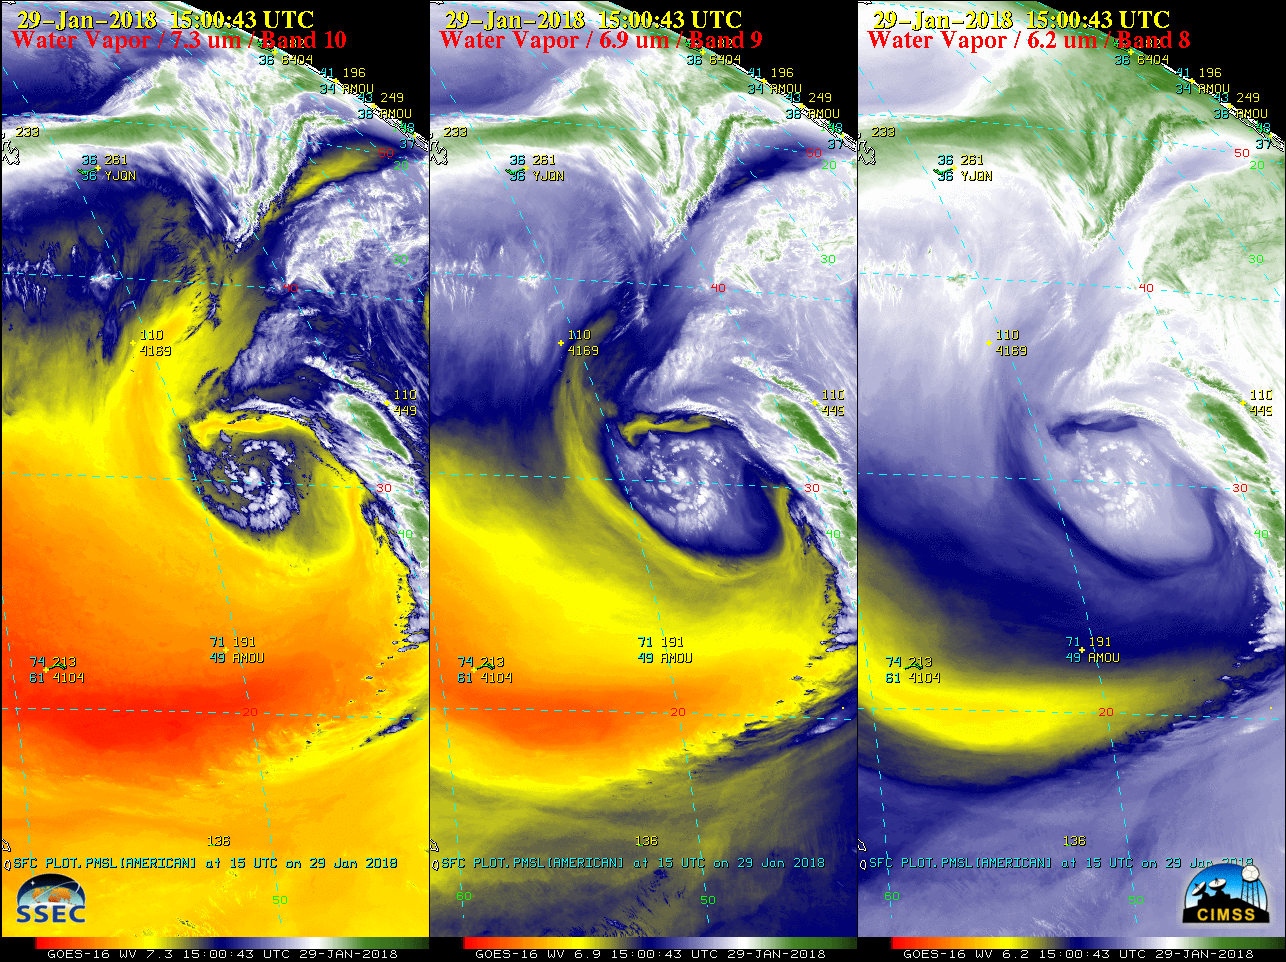 GOES-16 Low-level (7.3 µm, left), Mid-level (6.9 µm, center) and Upper-level (6.2 µm) images [click to play MP4 animation]